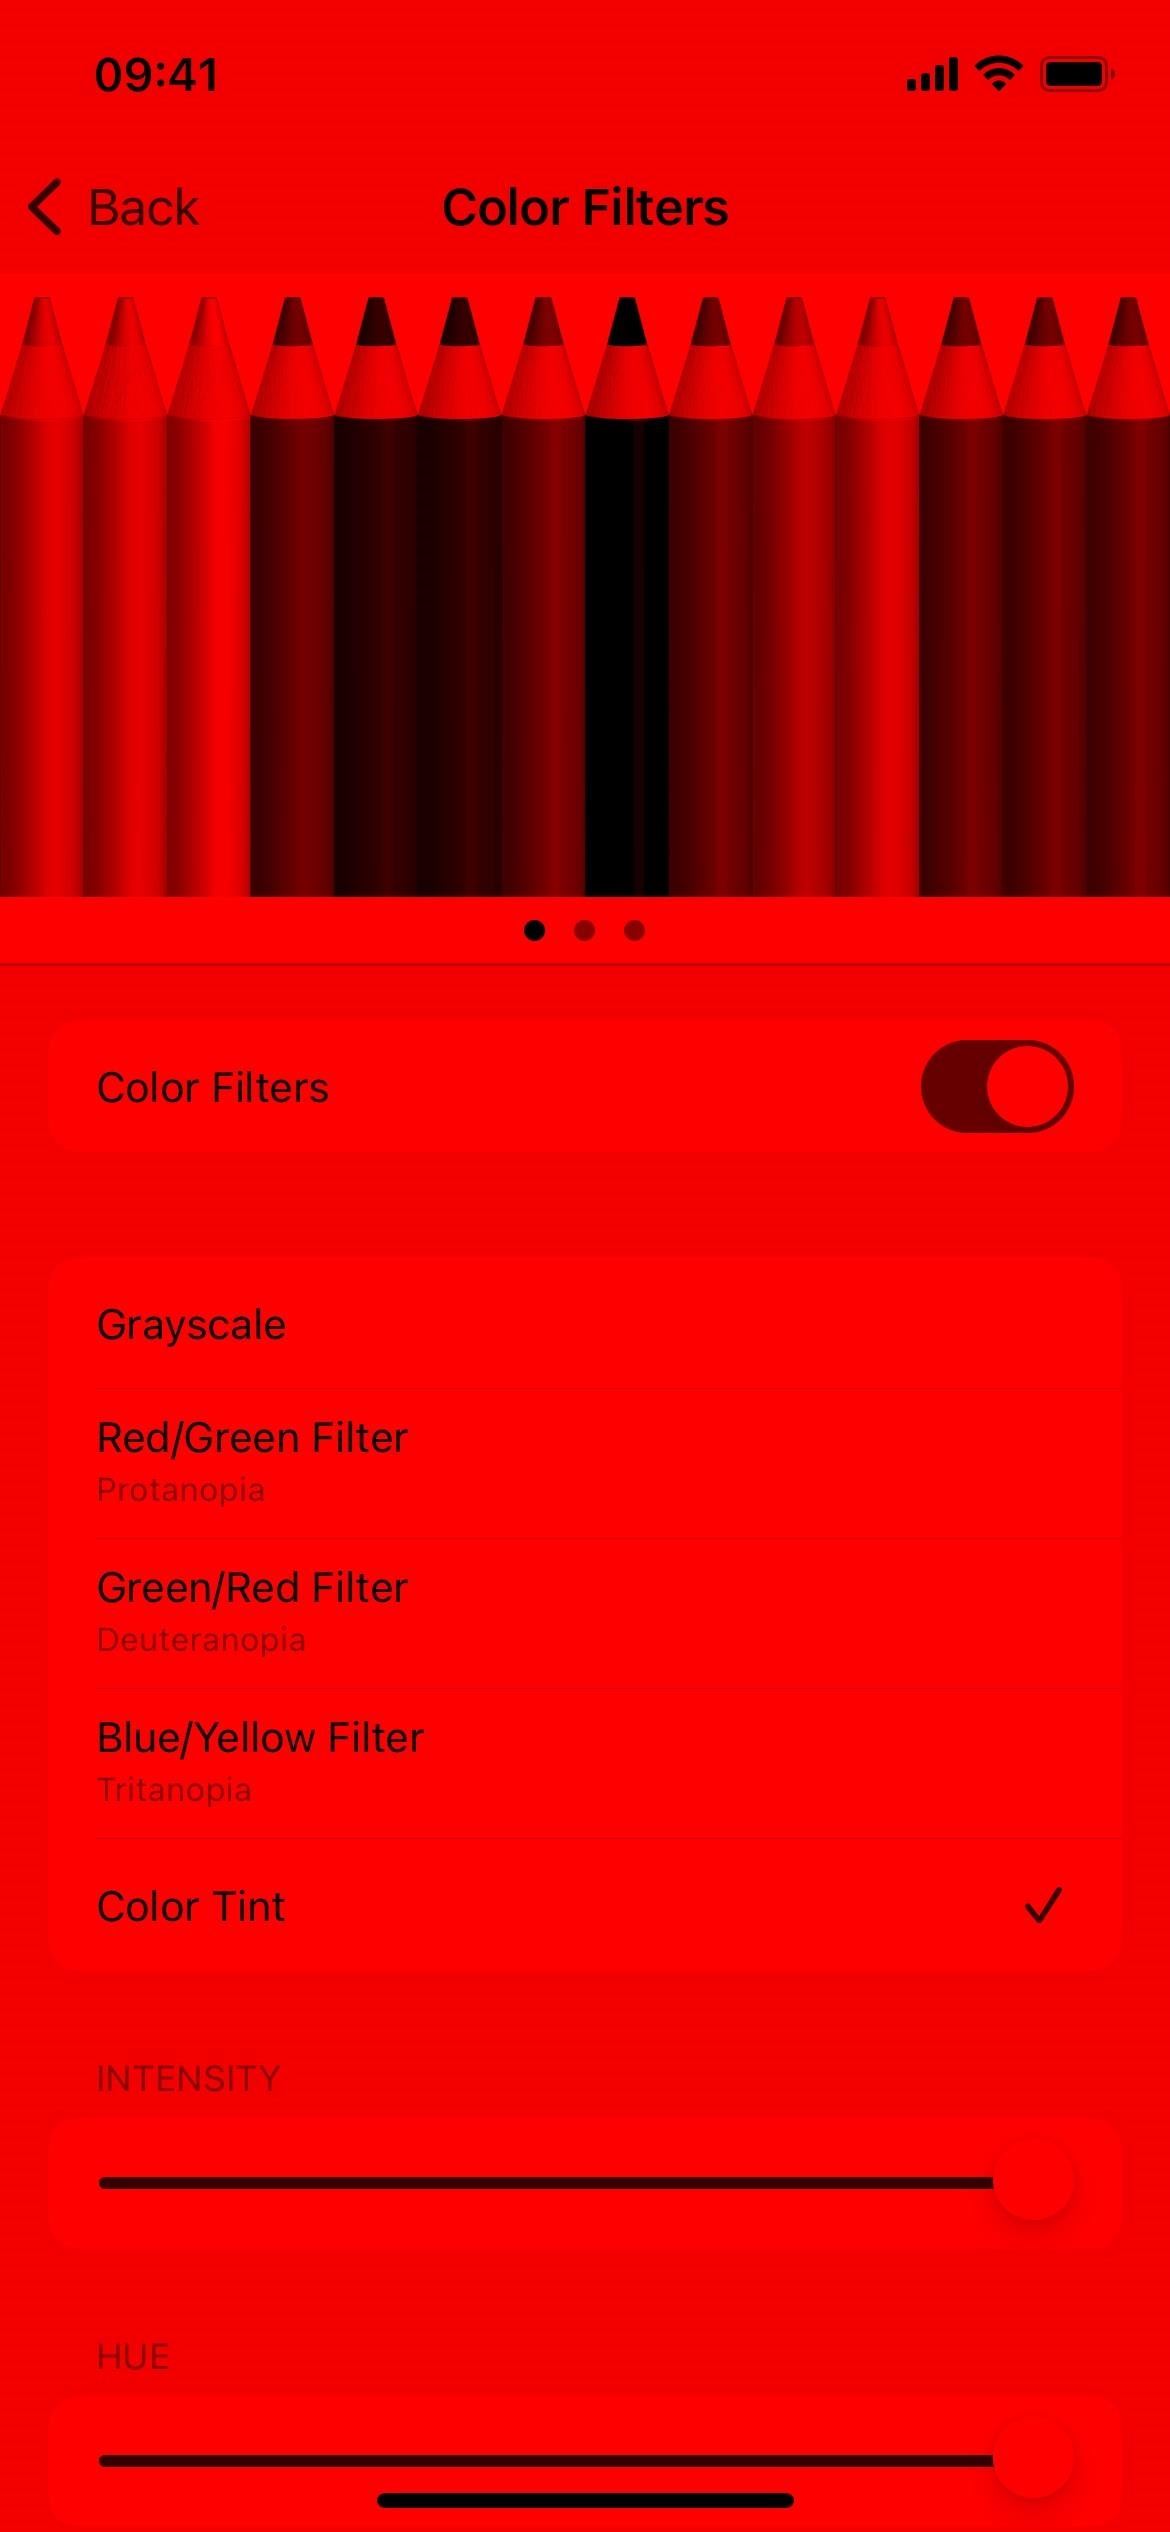 Update Your iPhone Calculator's Look with These Easy Color Mods